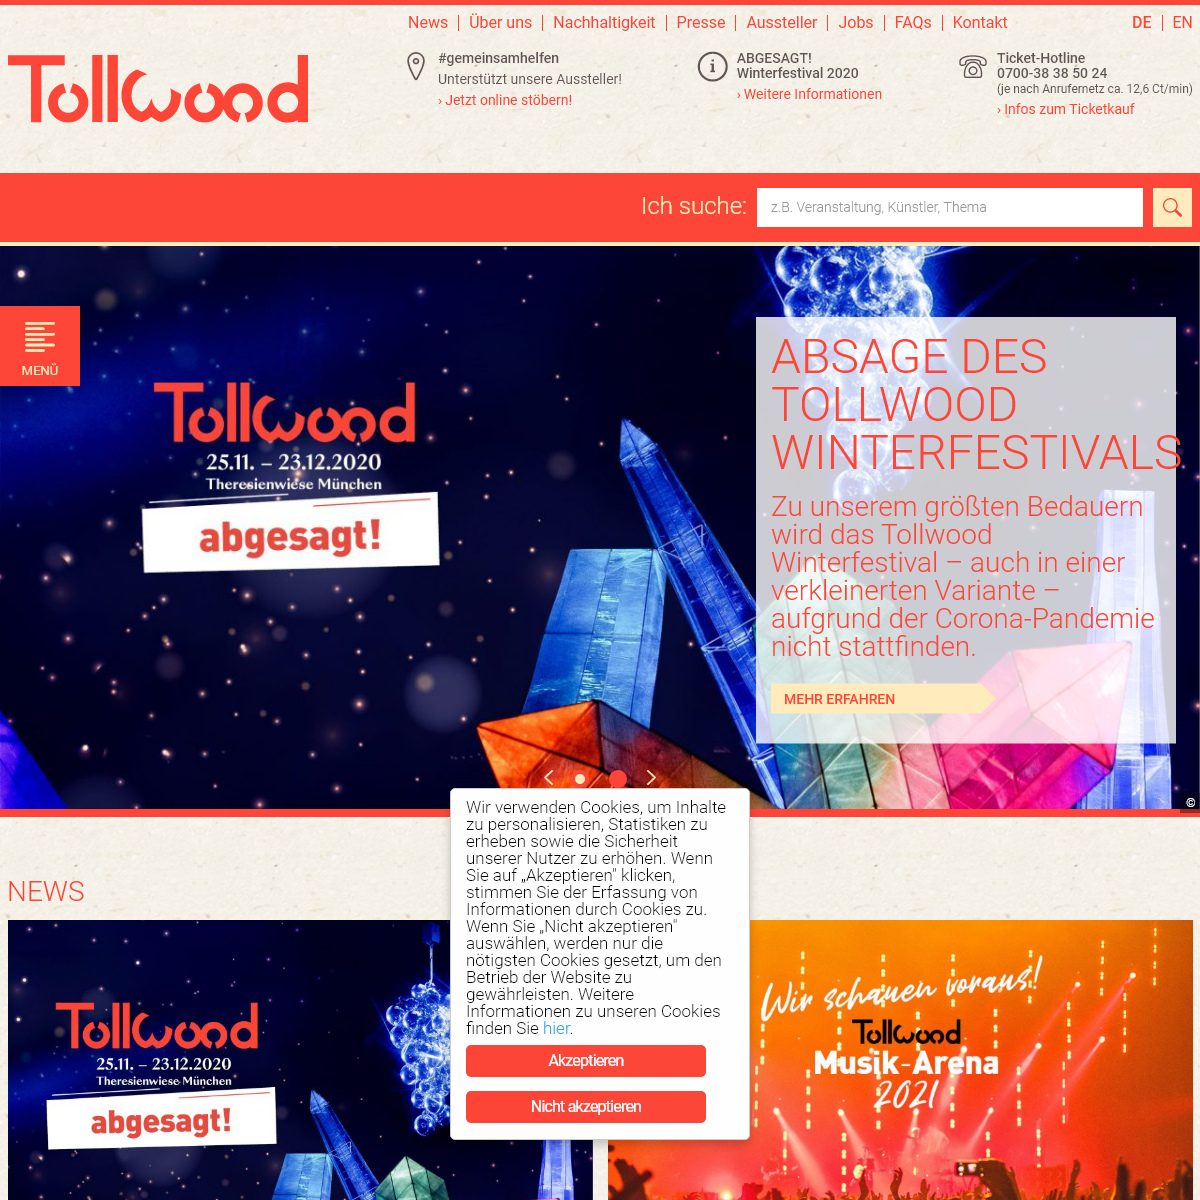 A complete backup of tollwood.de